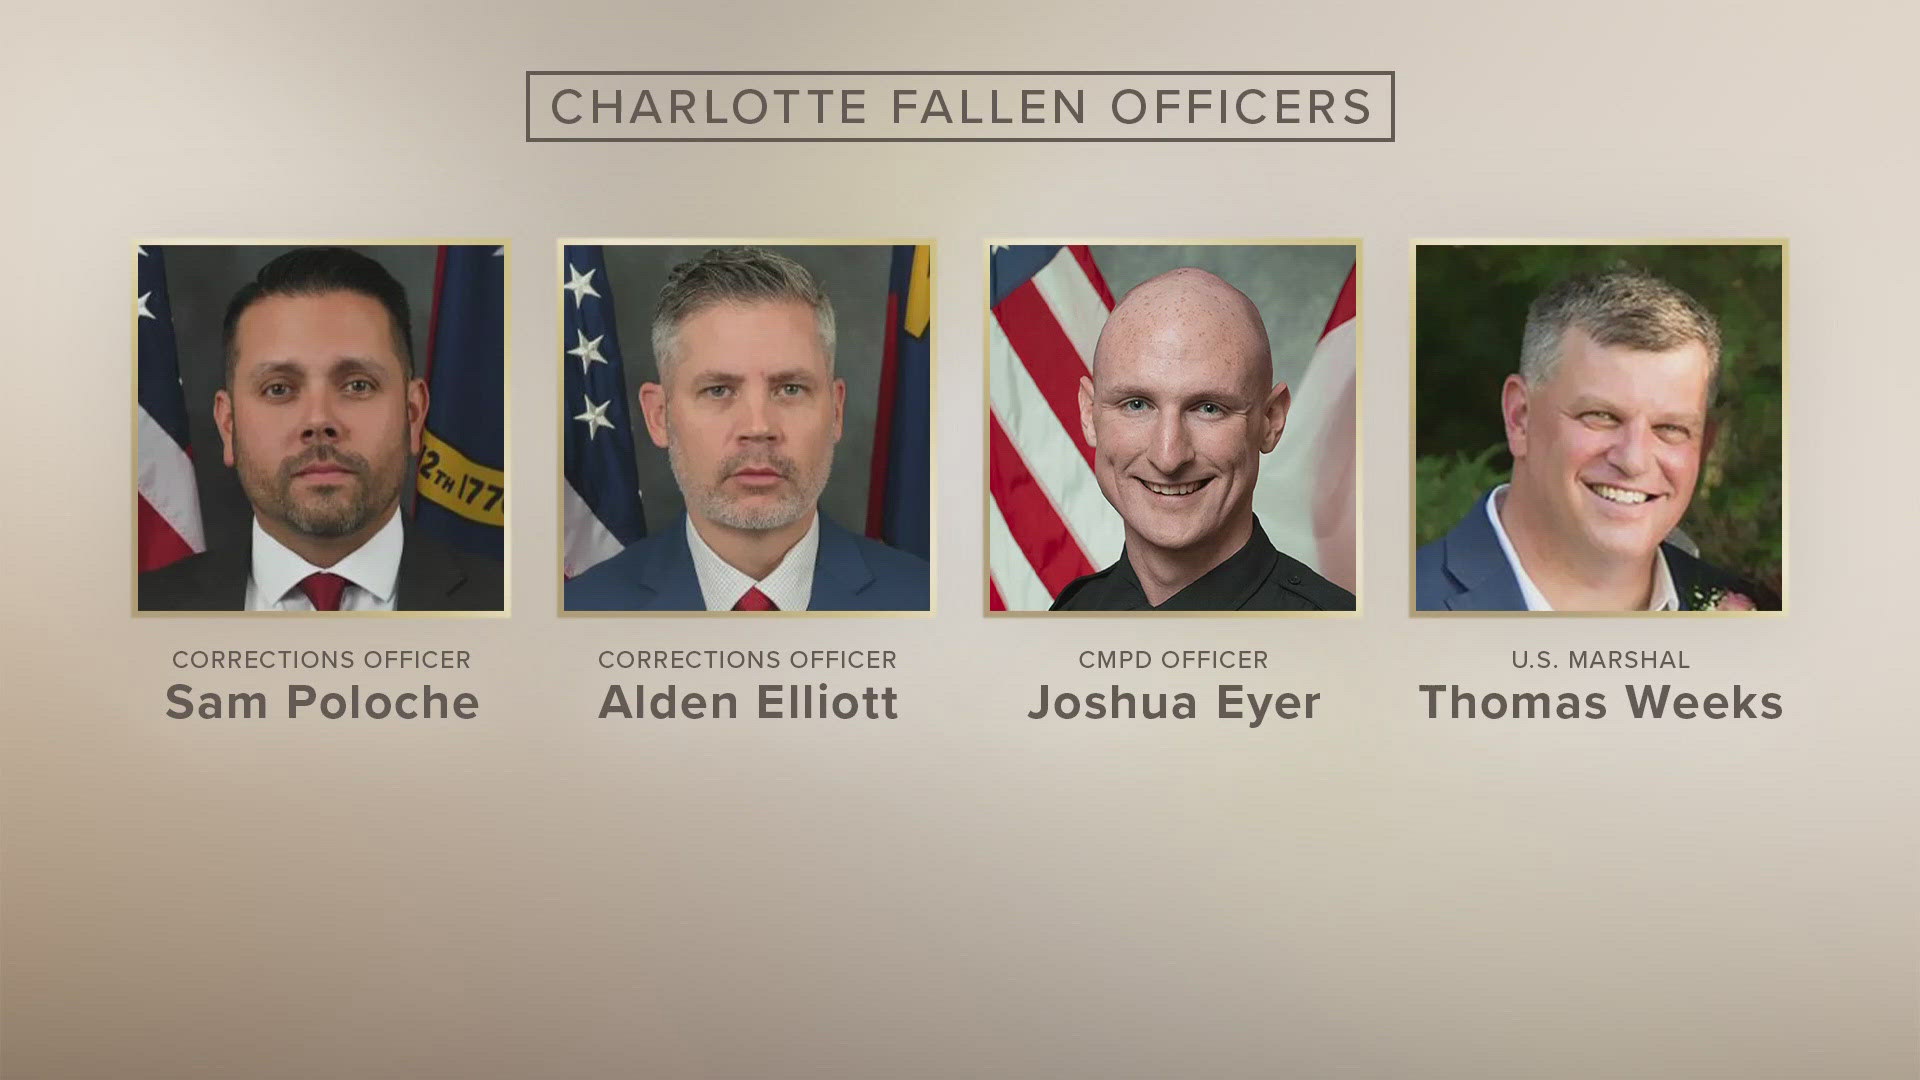 The Charlotte-Mecklenburg Police Department will honor four officers killed in the line of duty, adding Joshua Eyer's name to the fallen officer memorial in Uptown.